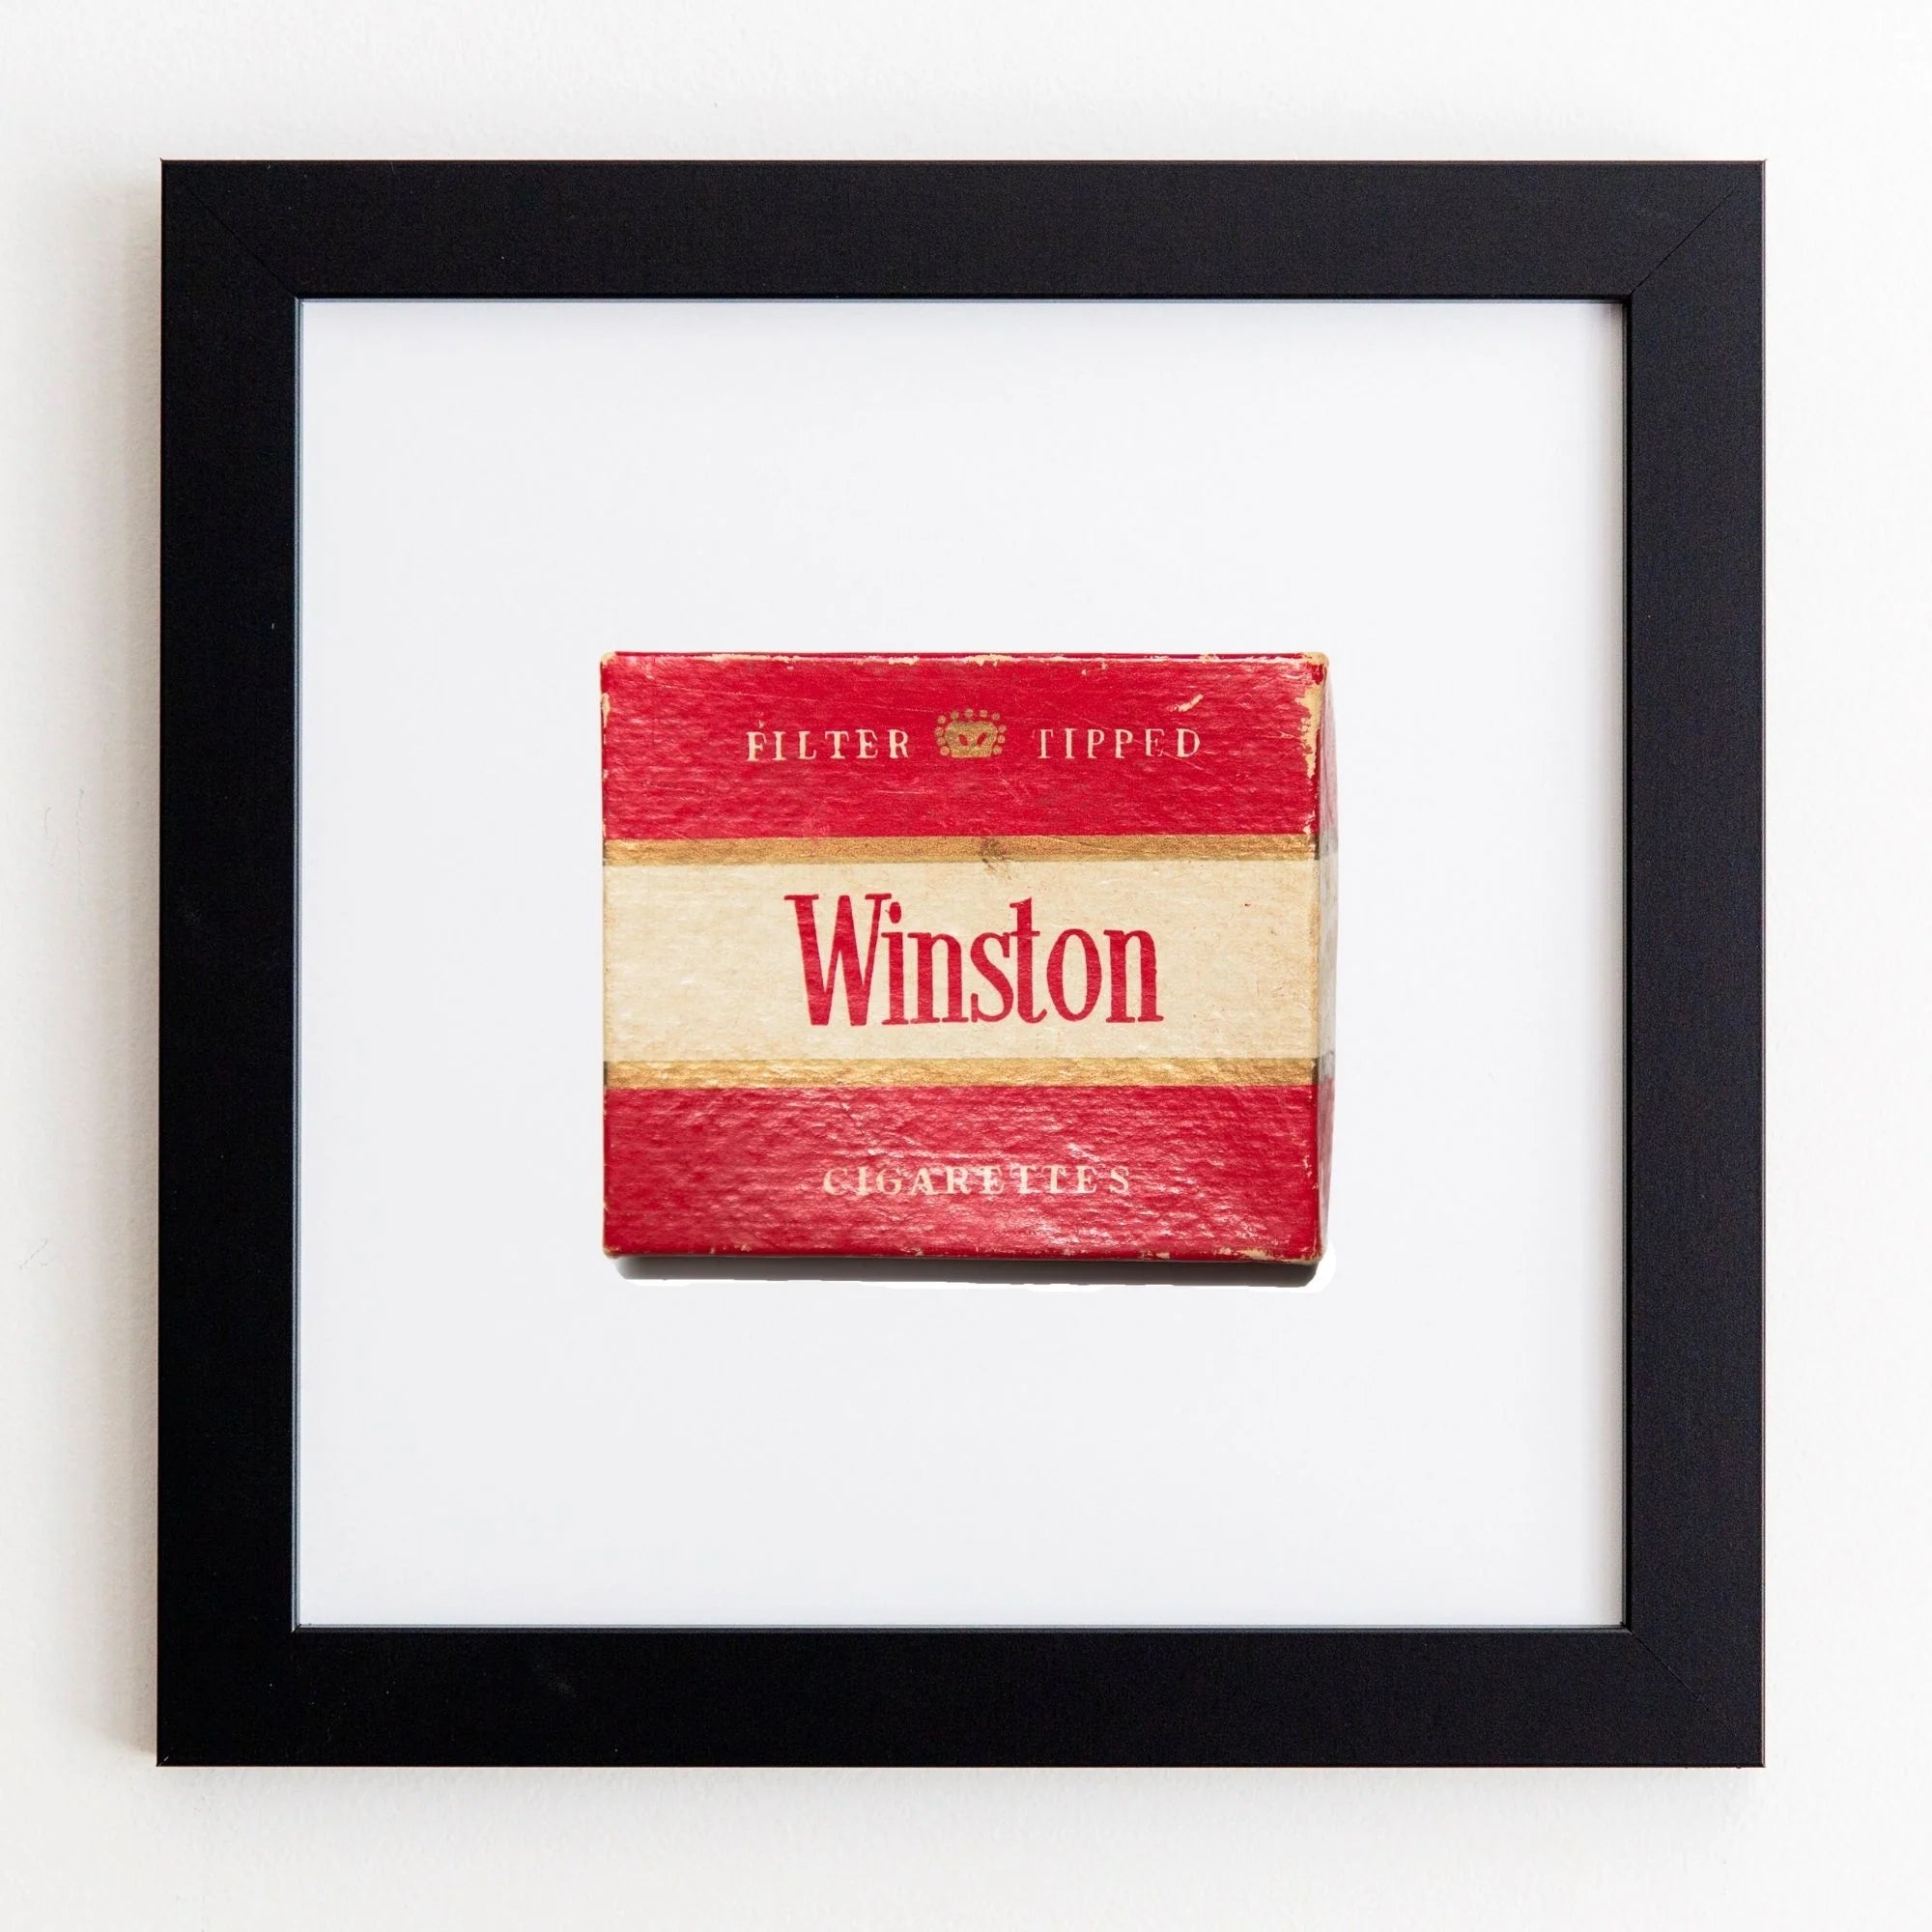 A vintage Winston cigarette pack, prominently red and white, is displayed within a Match South Art Square Black Frame on a white wall. The pack is labeled &quot;Filter Tipped.